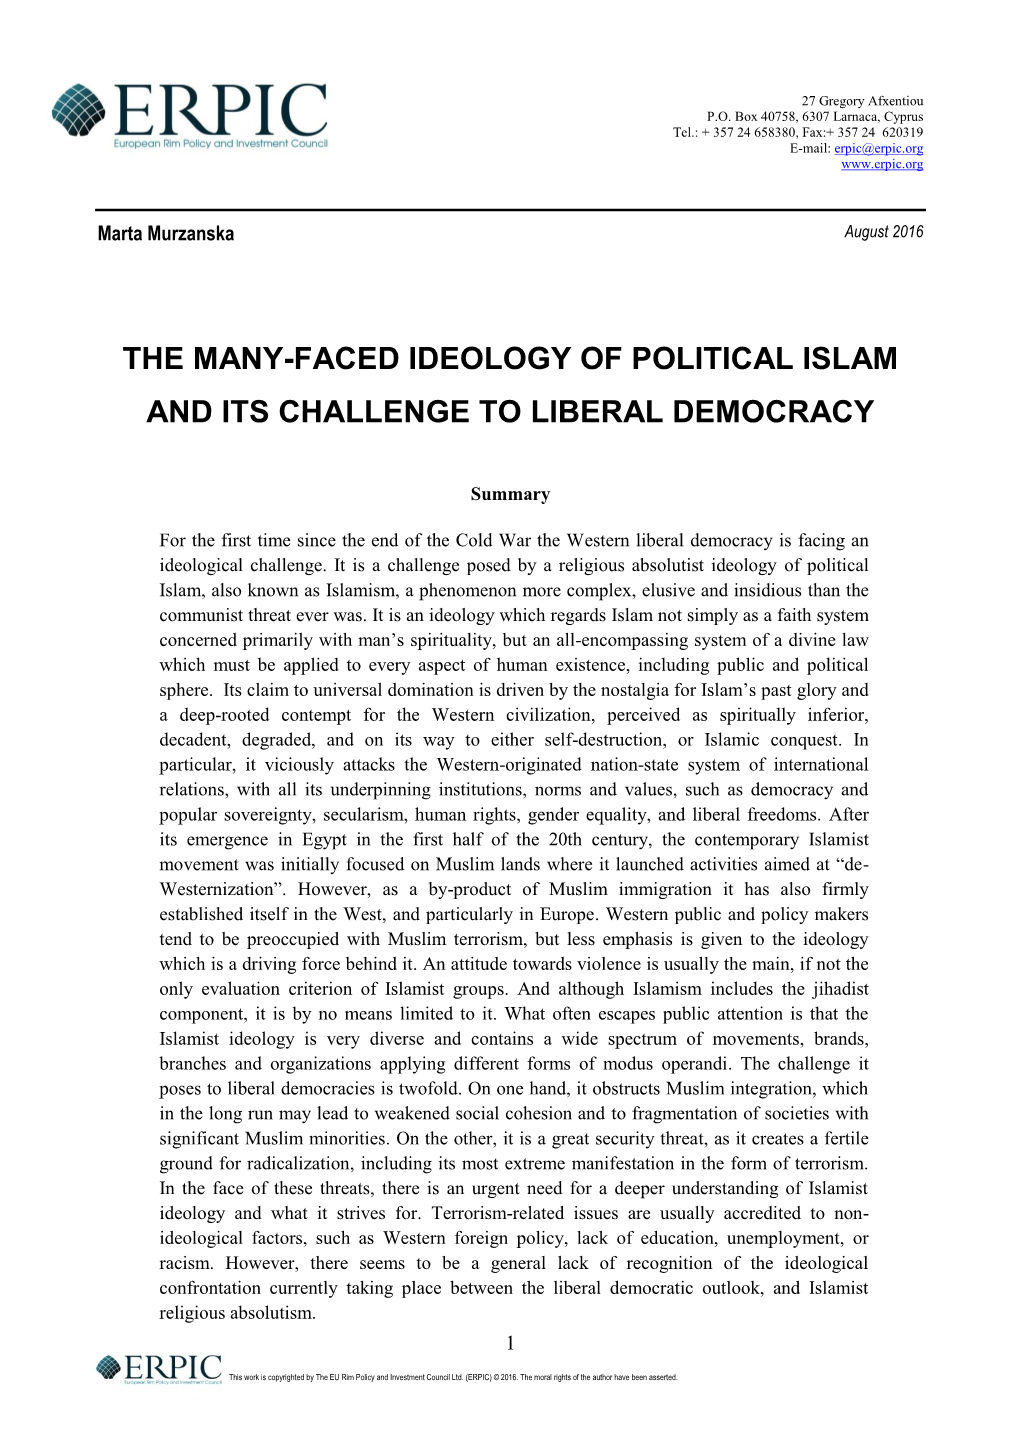 The Many-Faced Ideology of Political Islam and Its Challenge to Liberal Democracy